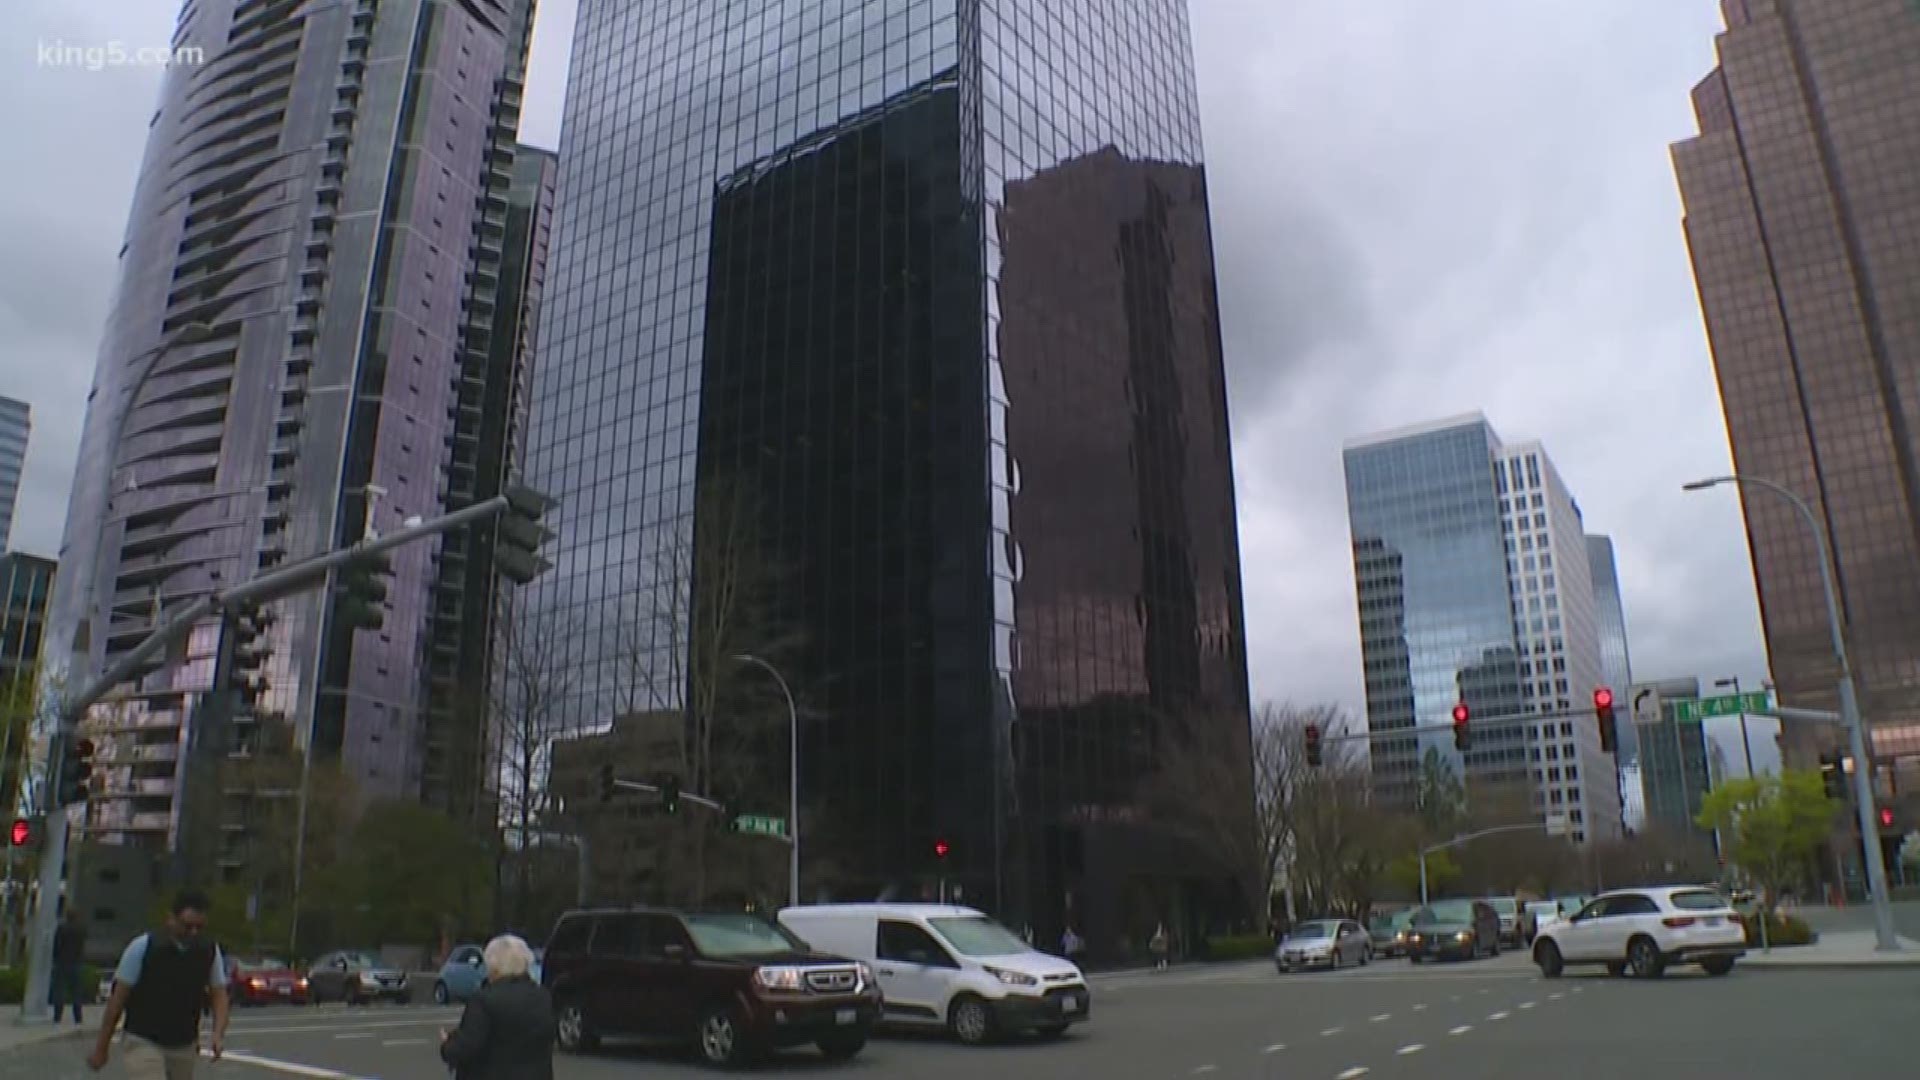 Amazon's worldwide operations team, which is based in Seattle, will move to Bellevue by 2023. In a statement, the tech giant praised the Eastside city for its "business-friendly environment." KING 5's Ted Land reports